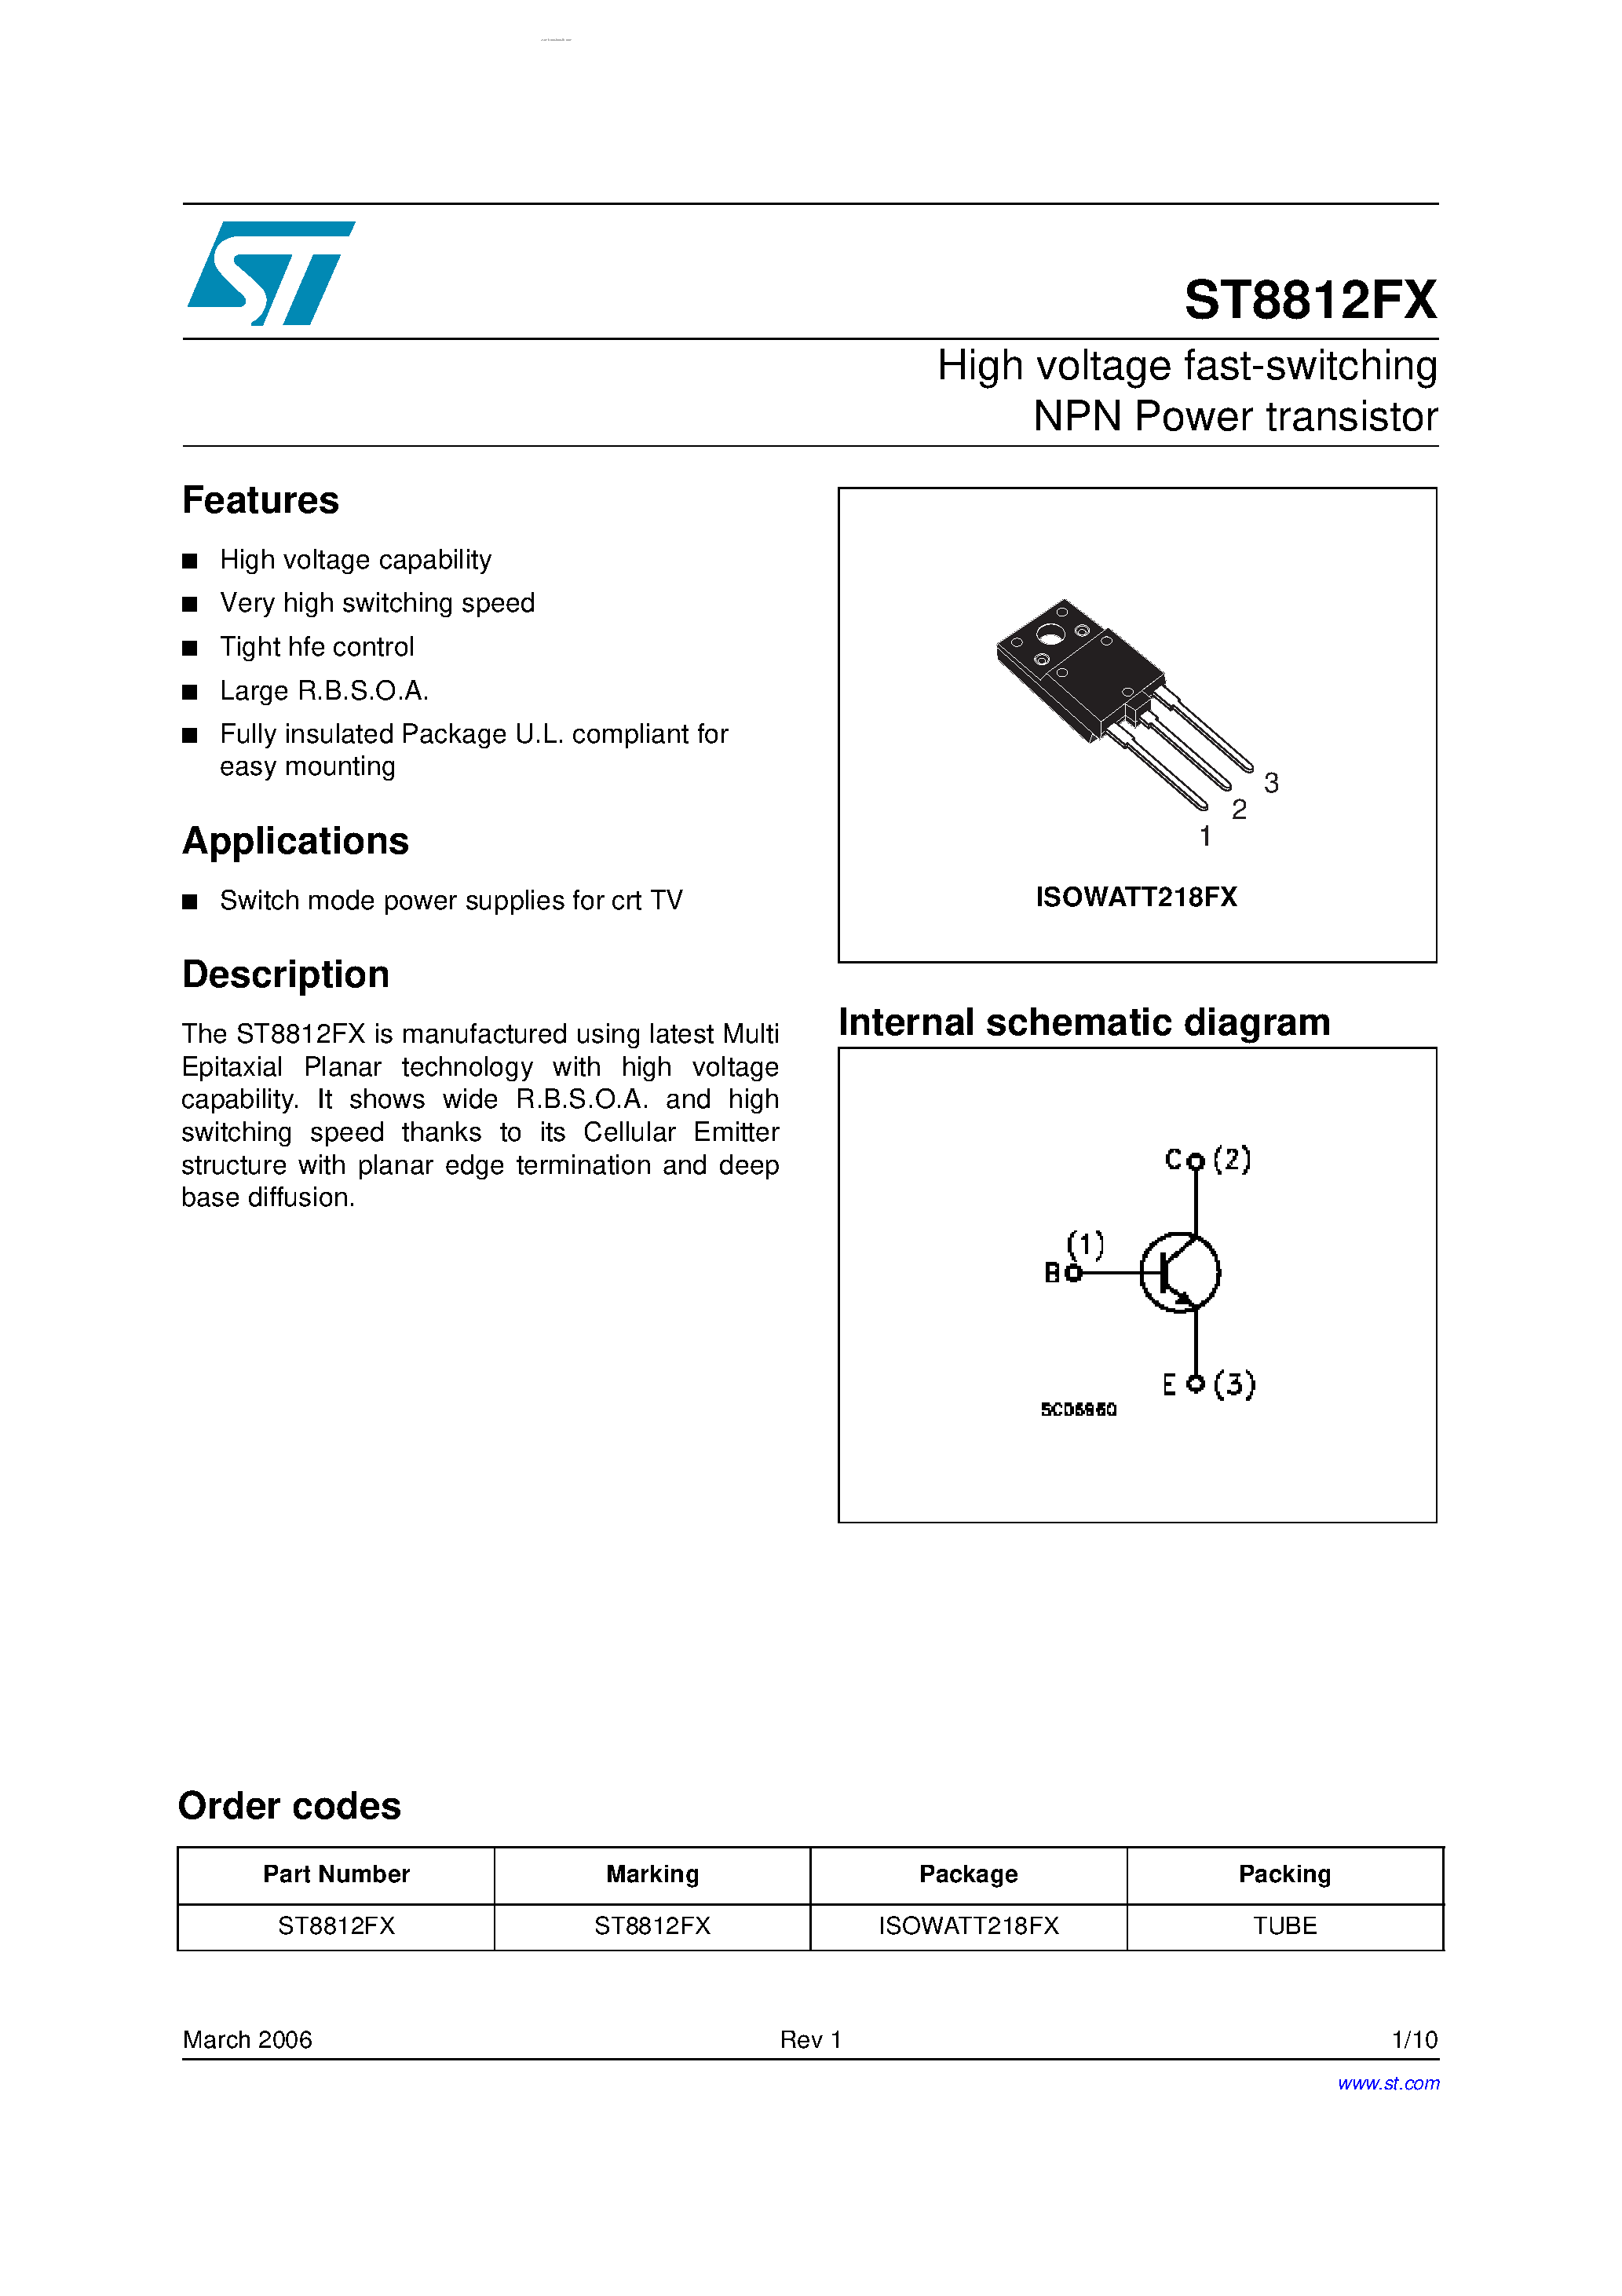 Datasheet ST8812FX - High voltage fast-switching NPN Power transistor page 1